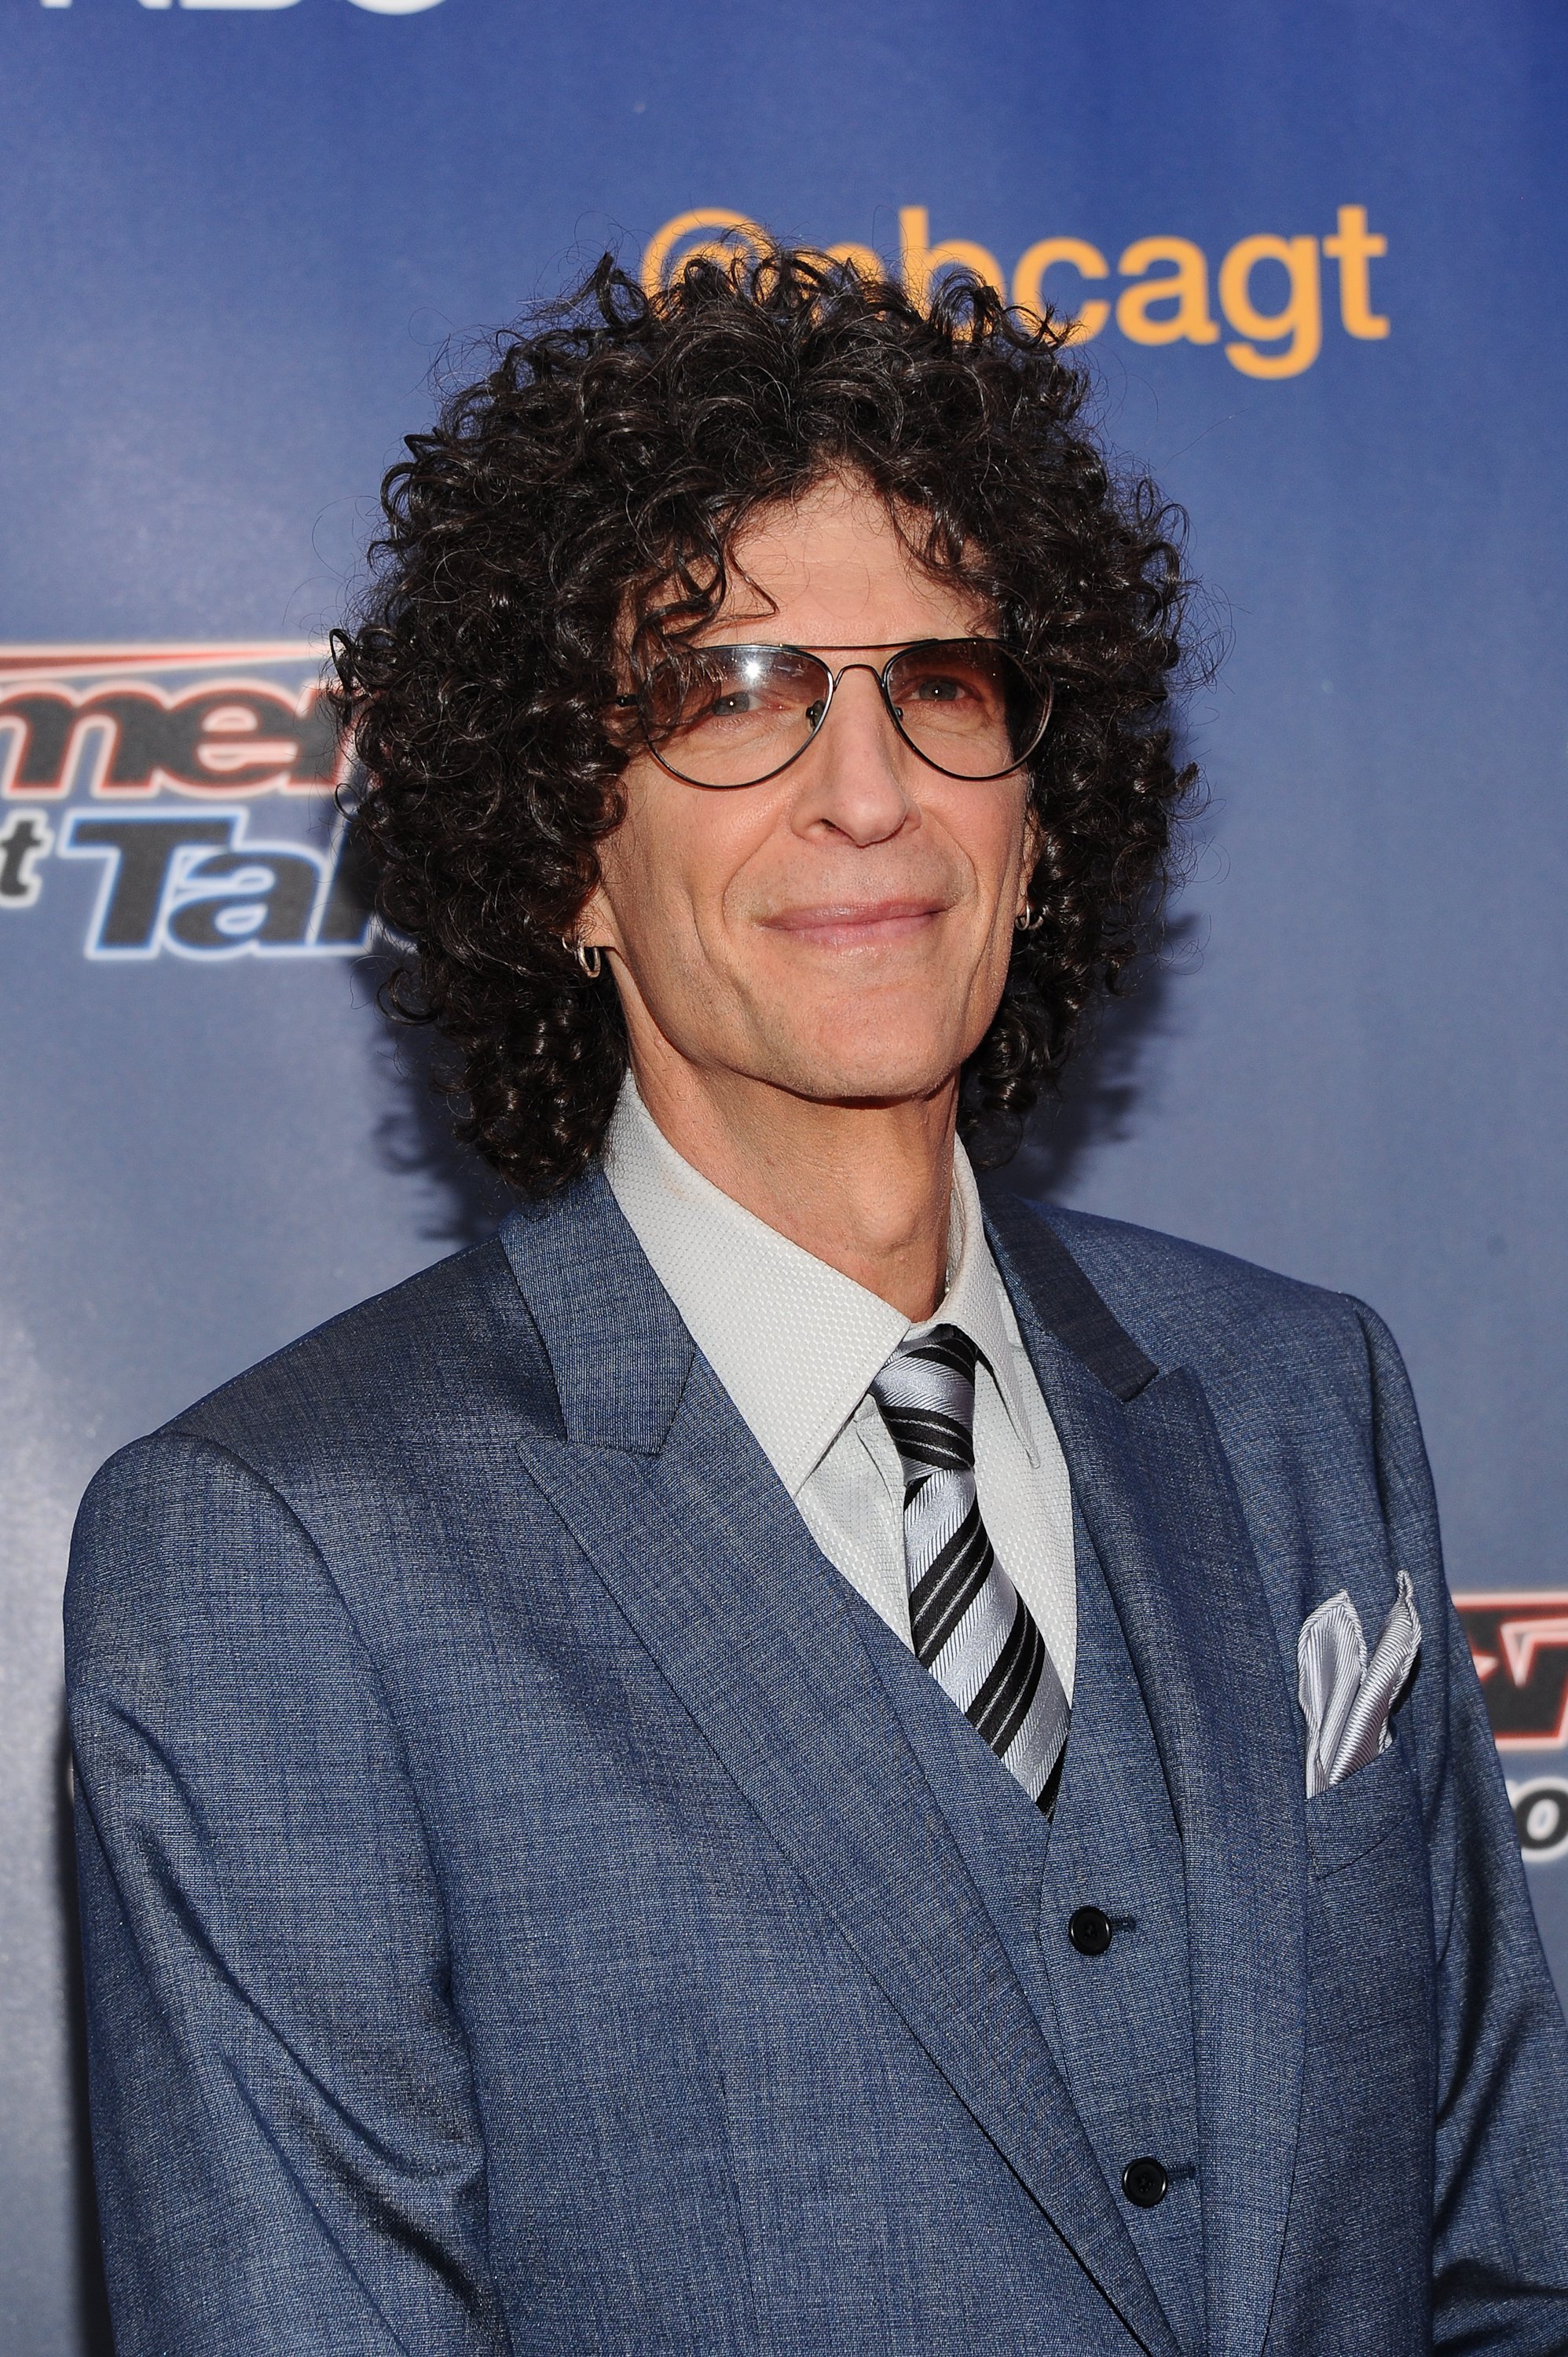 Howard Stern attends the "America's Got Talent" Season 9 Pre Show Red Carpet Event at Radio City Music Hall on July 29, 2014. | Source: Getty Images